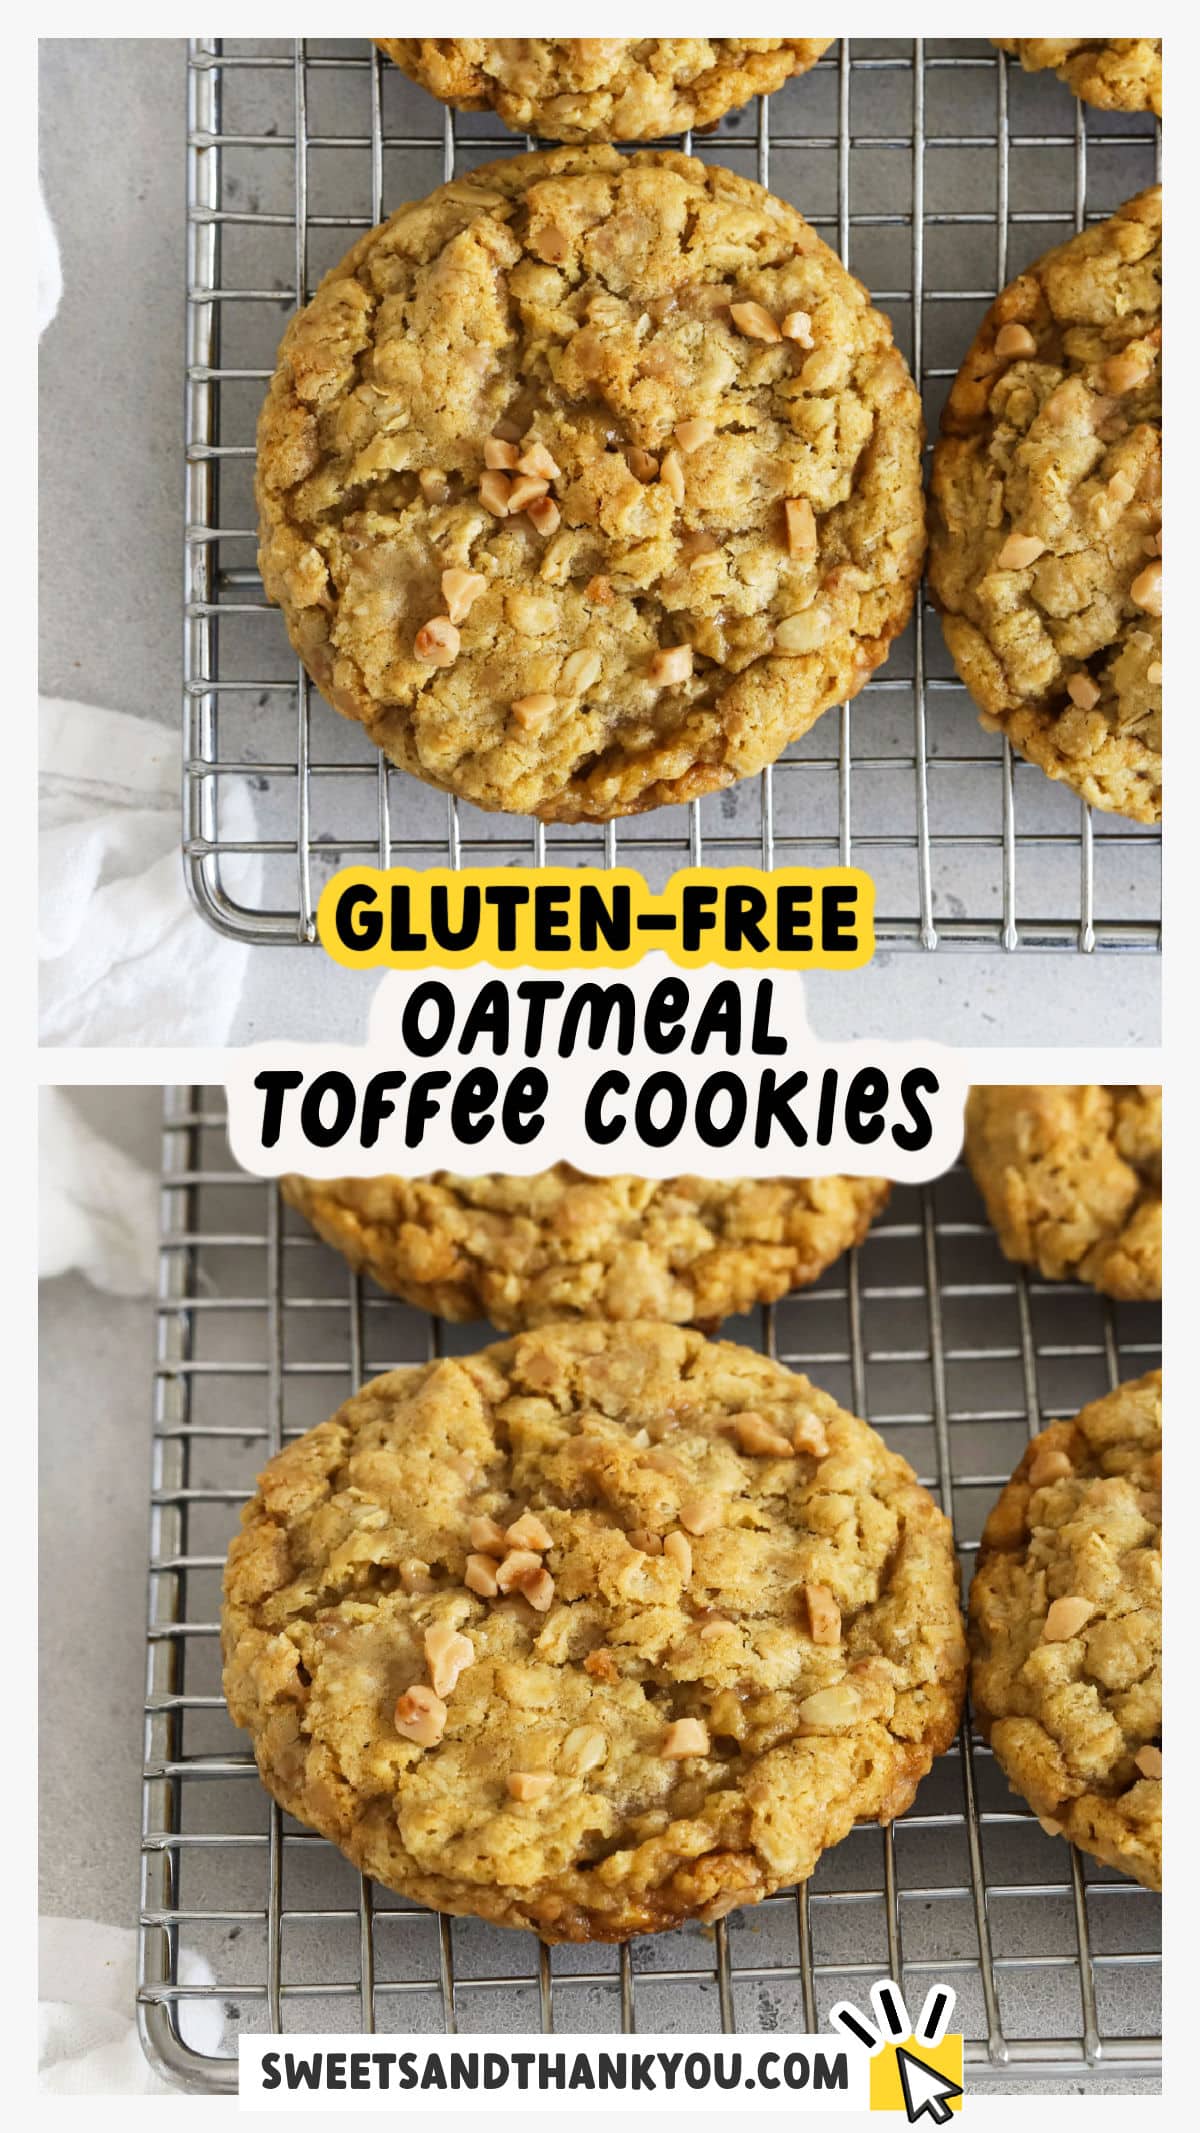 Our Gluten-Free Oatmeal Toffee Cookies combine a soft, chewy oatmeal cookie base with crunchy toffee bits for a yummy bakery-style cookie recipe you'll LOVE! They're a delicious take on classic oatmeal cookies and so easy to make, thanks to simple ingredients. Get the recipe for these gluten-free toffee oatmeal cookies (and a few variations to try!) at sweetsandthankyou.com